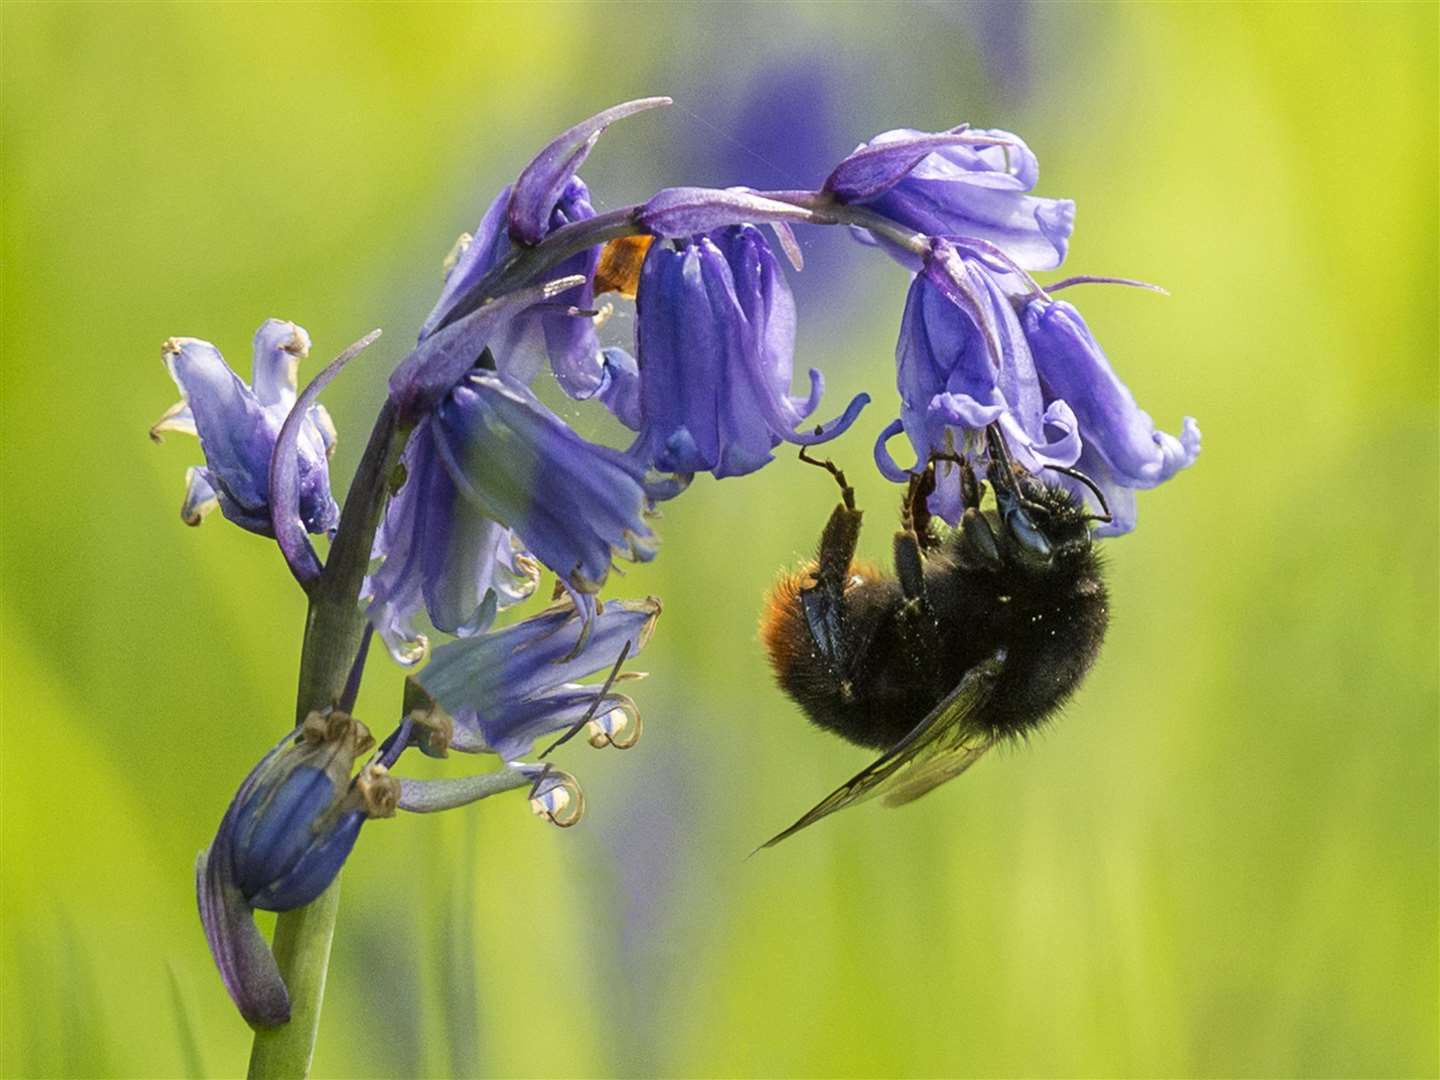 A bumblebee clings to a bluebell